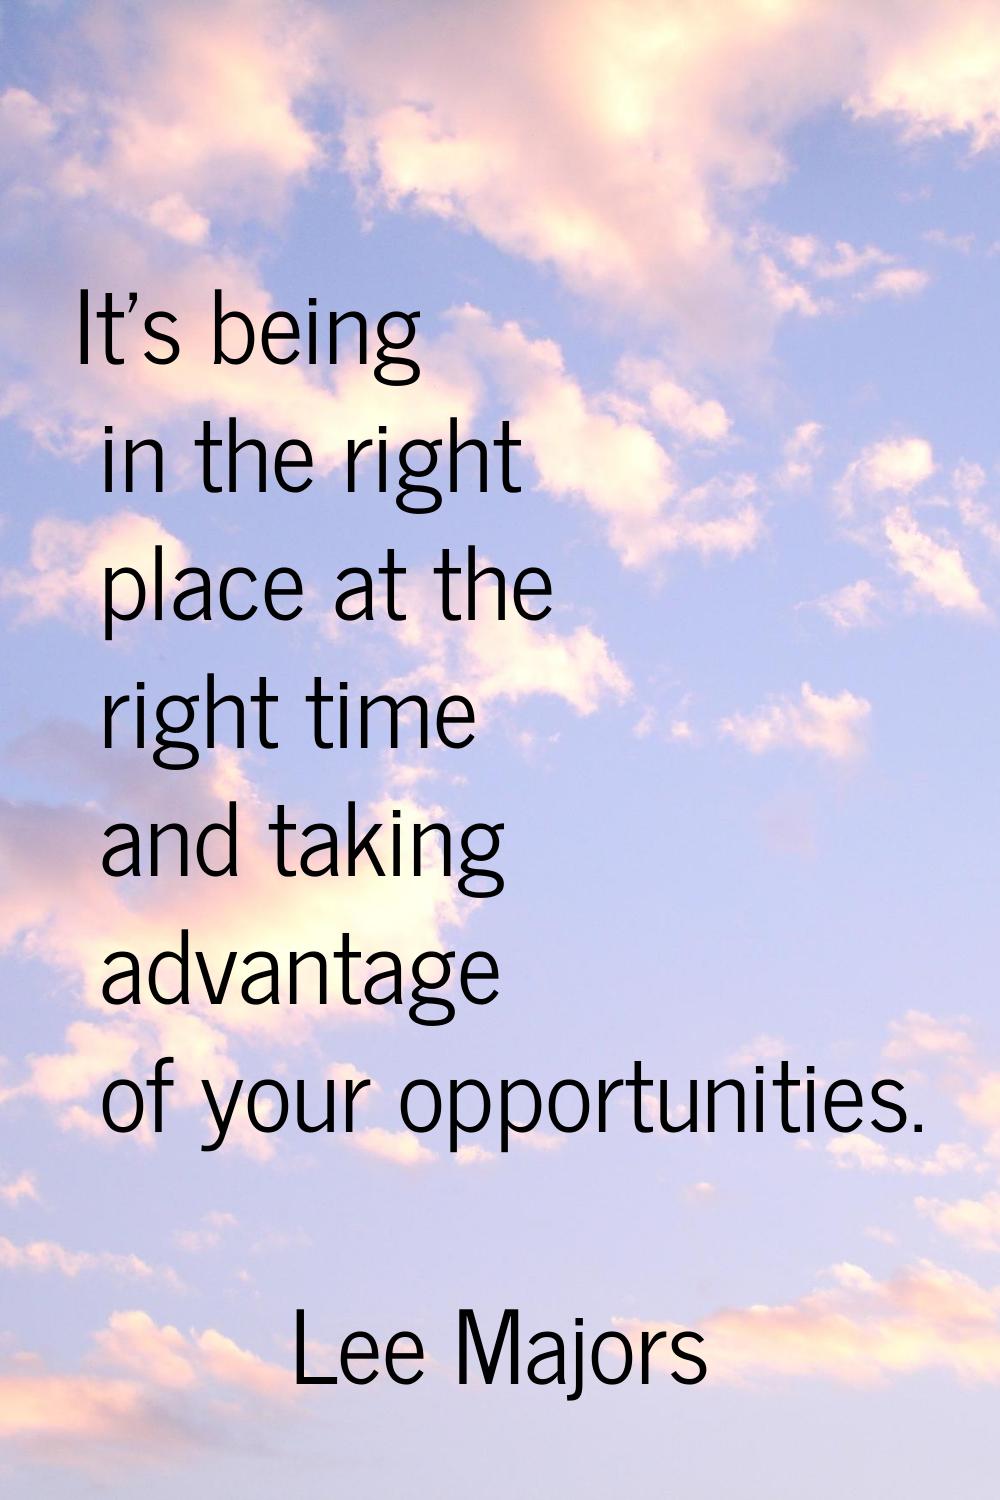 It's being in the right place at the right time and taking advantage of your opportunities.